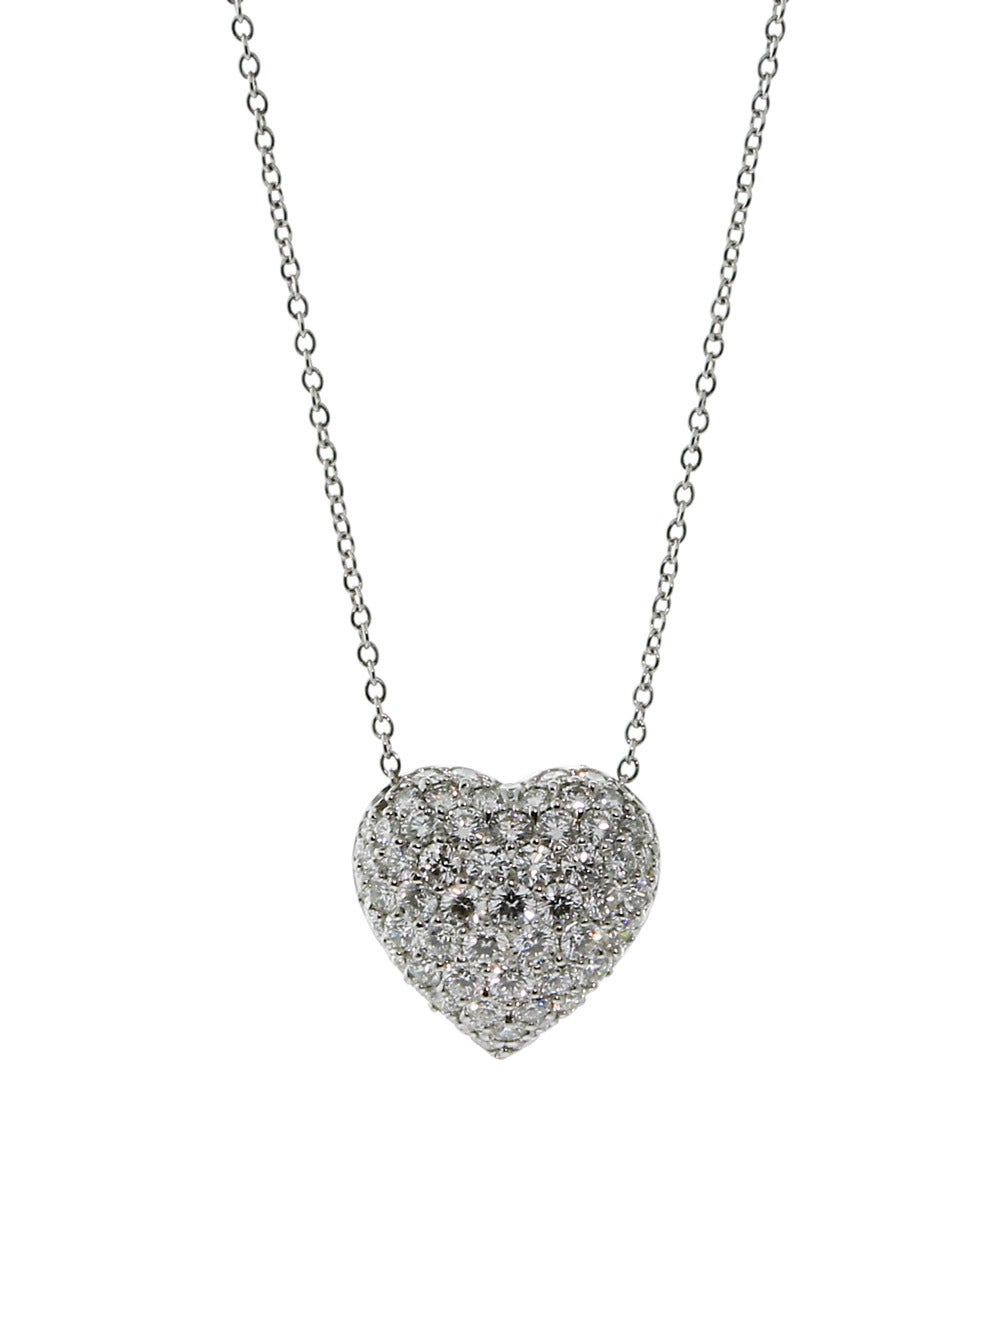 A chic Cartier necklace adorned with appx 2.3ct of Vs1 Round Brilliant Cut Diamonds set in Platinum. The heart measures .47